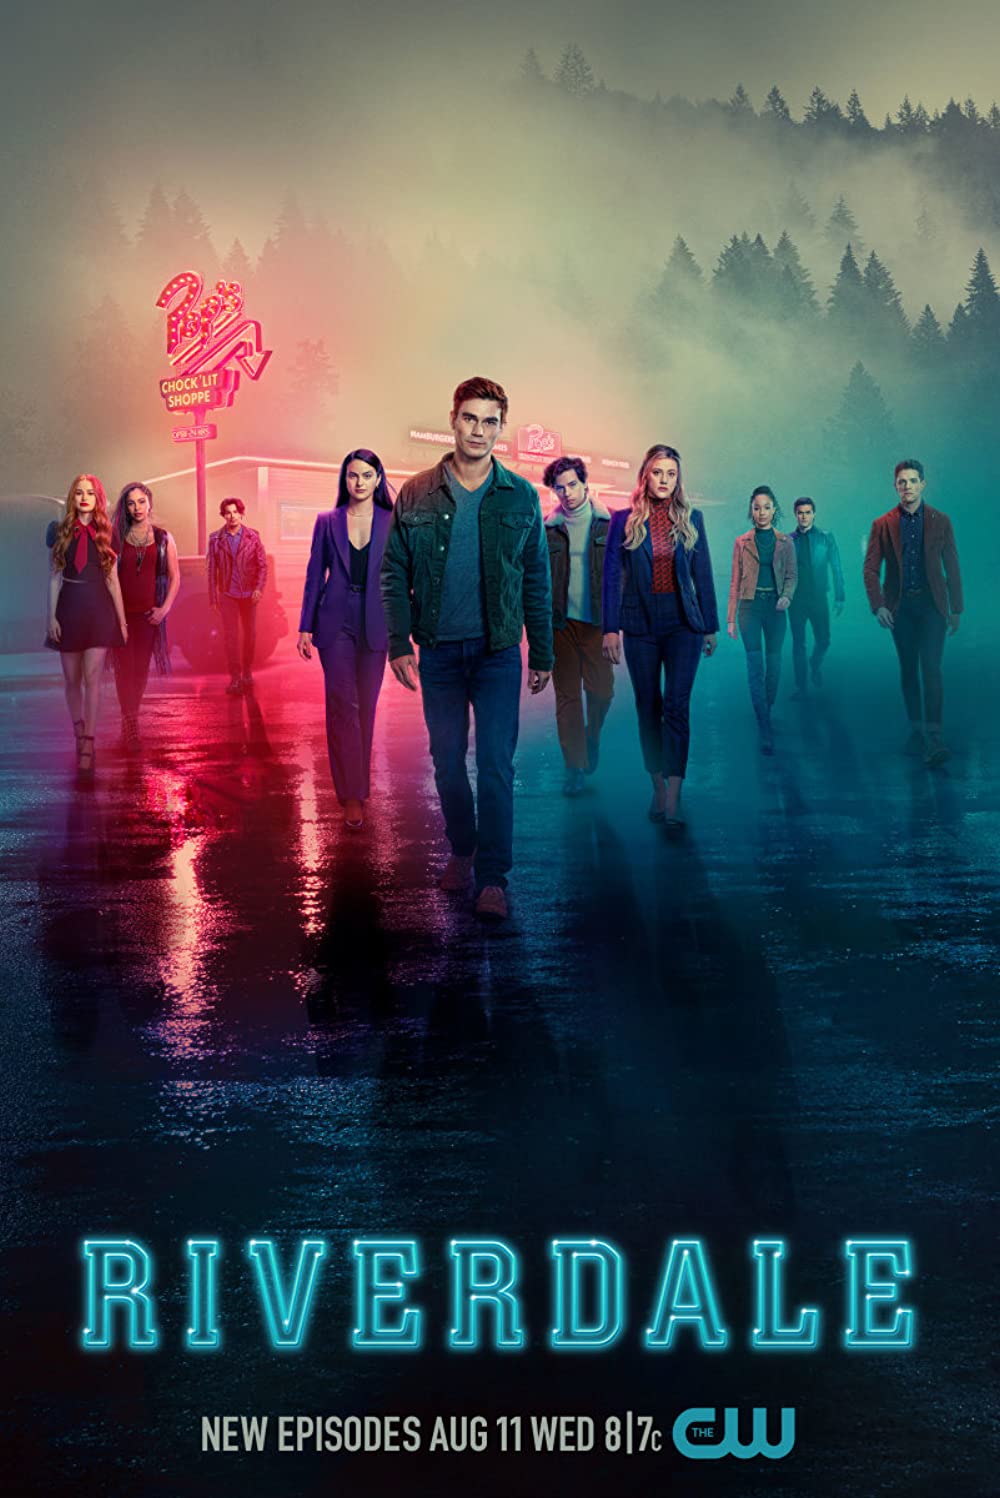 Riverdale Next Episode Release Date And Watch Online